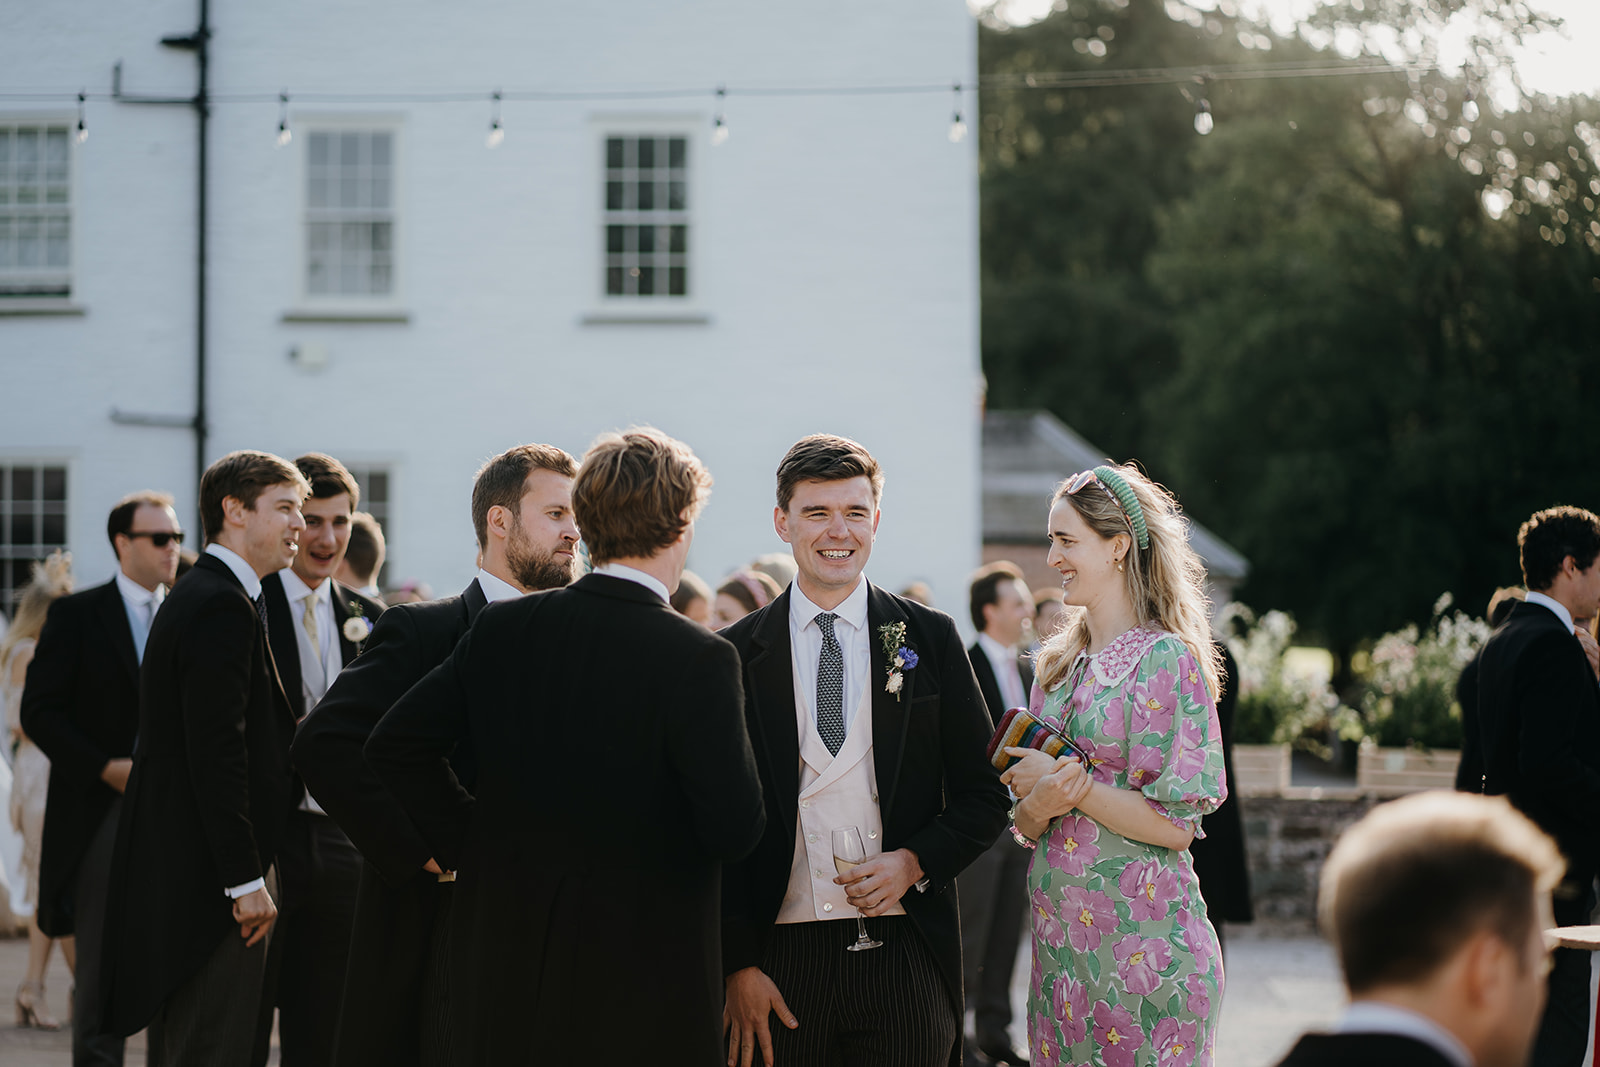 Natural candid moment of the groom talking with guests in the evening sunlight.